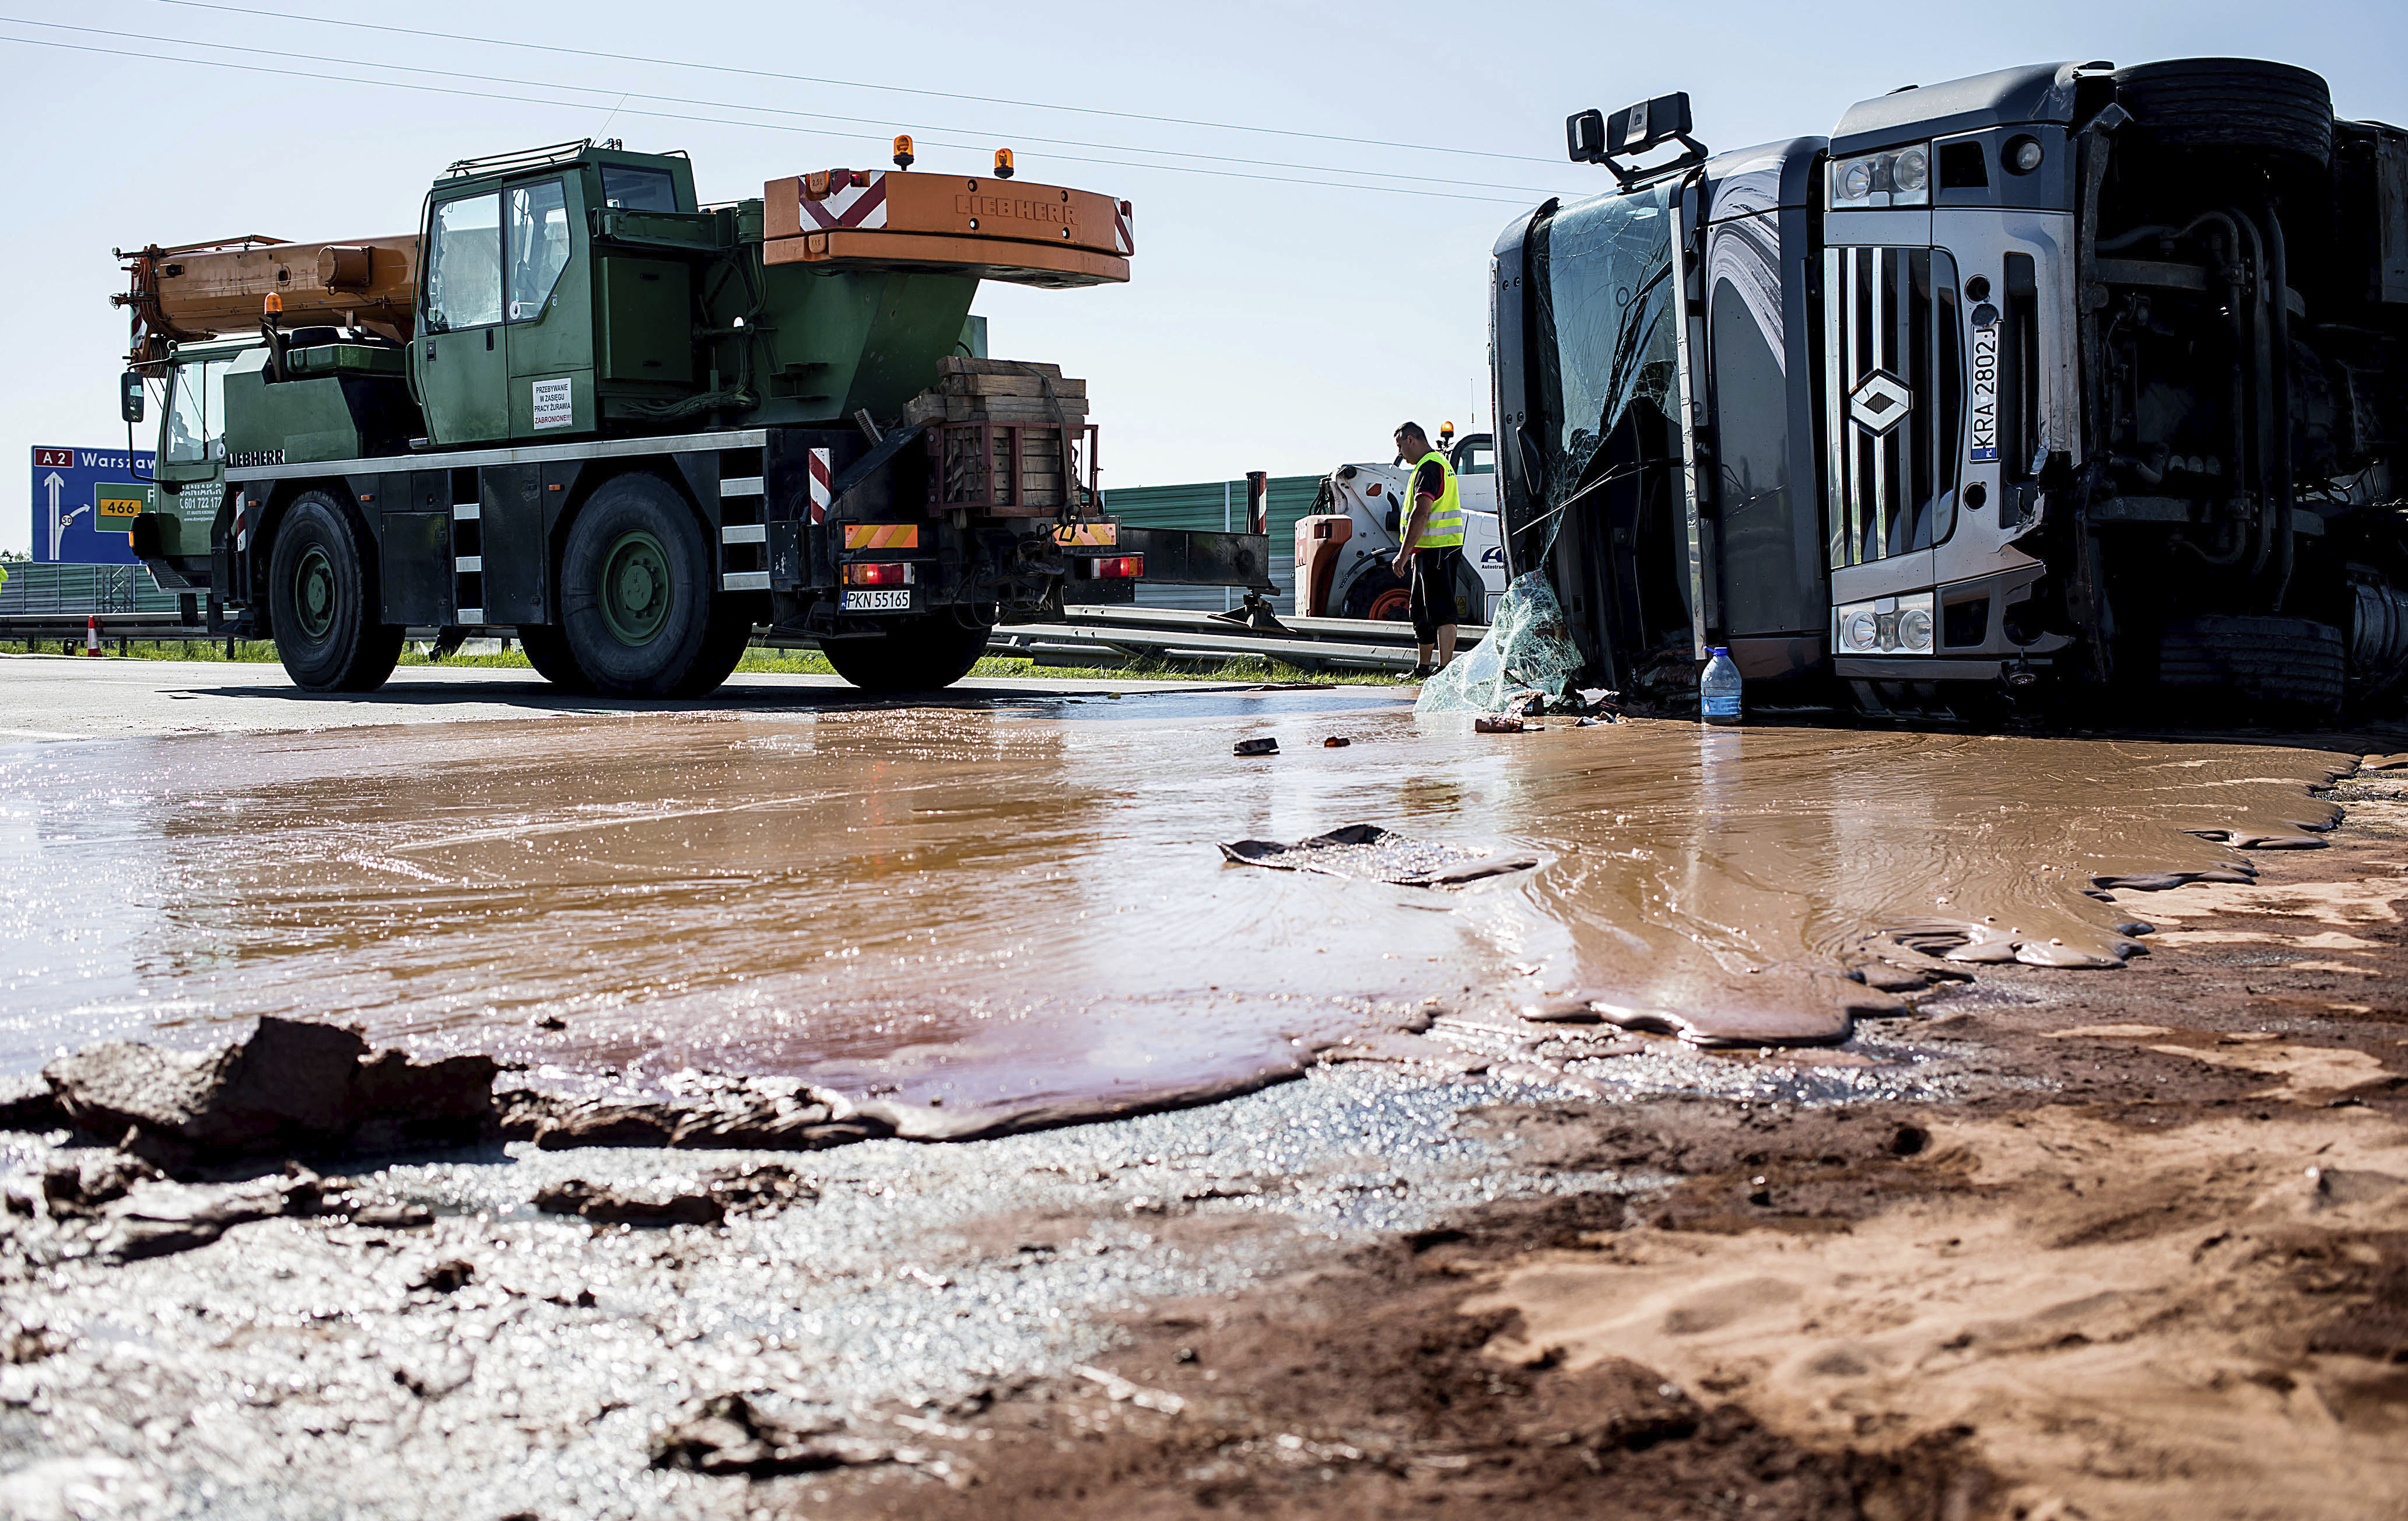 Why so many truck spills?